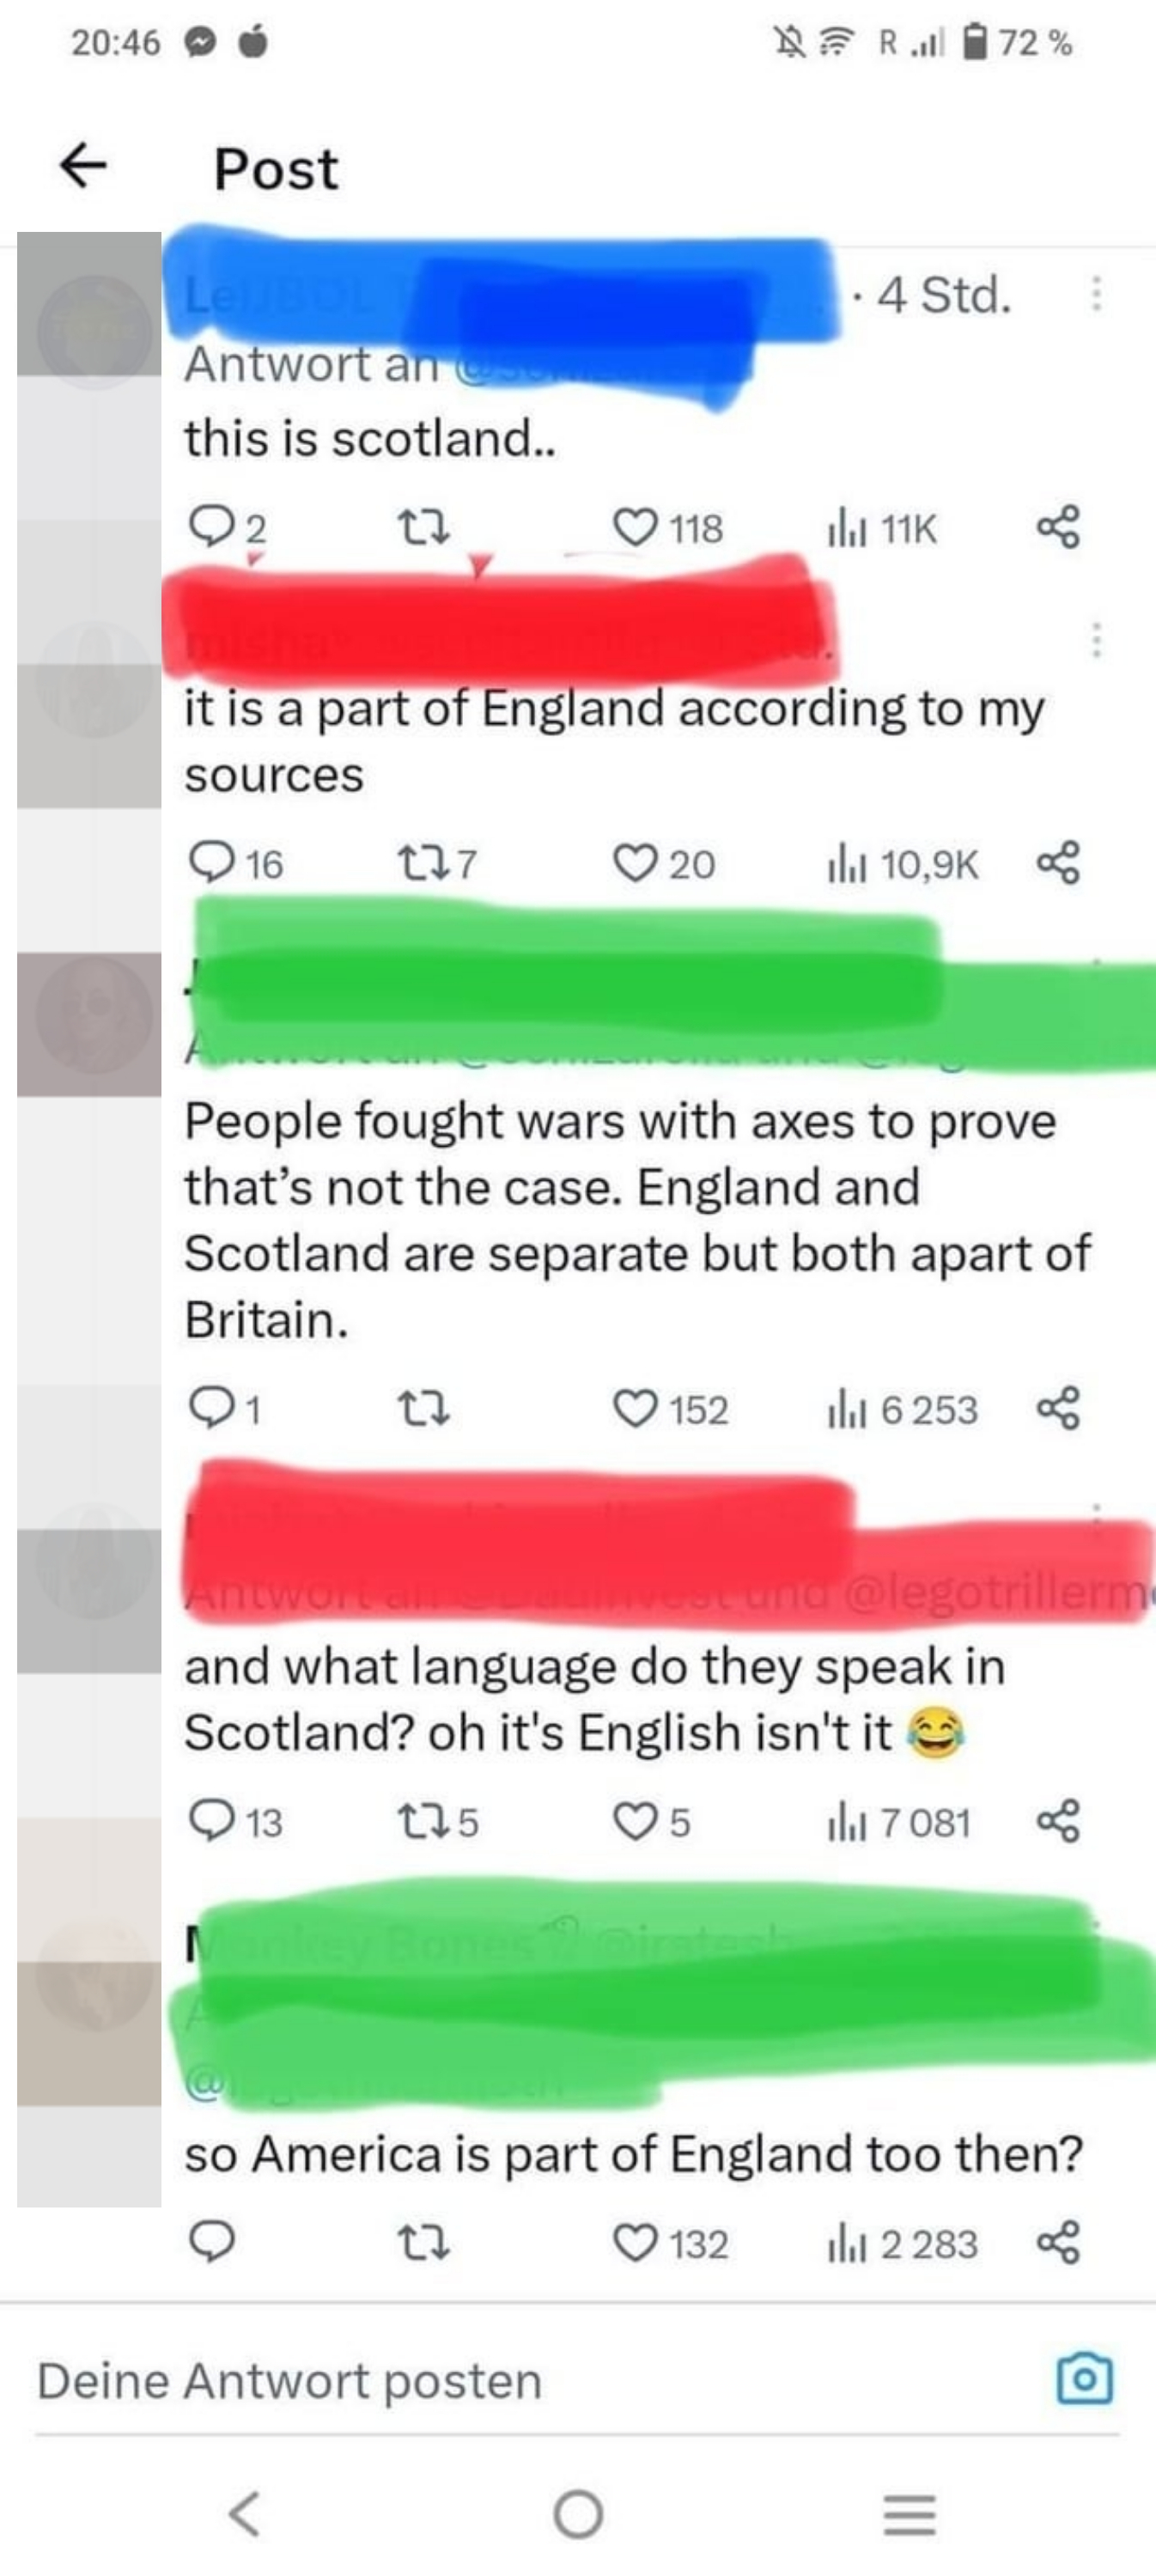 someone&#x27;s reasoning behind scotland and england being the same country is that they both speak english... so another person asks, so america is part of england too?